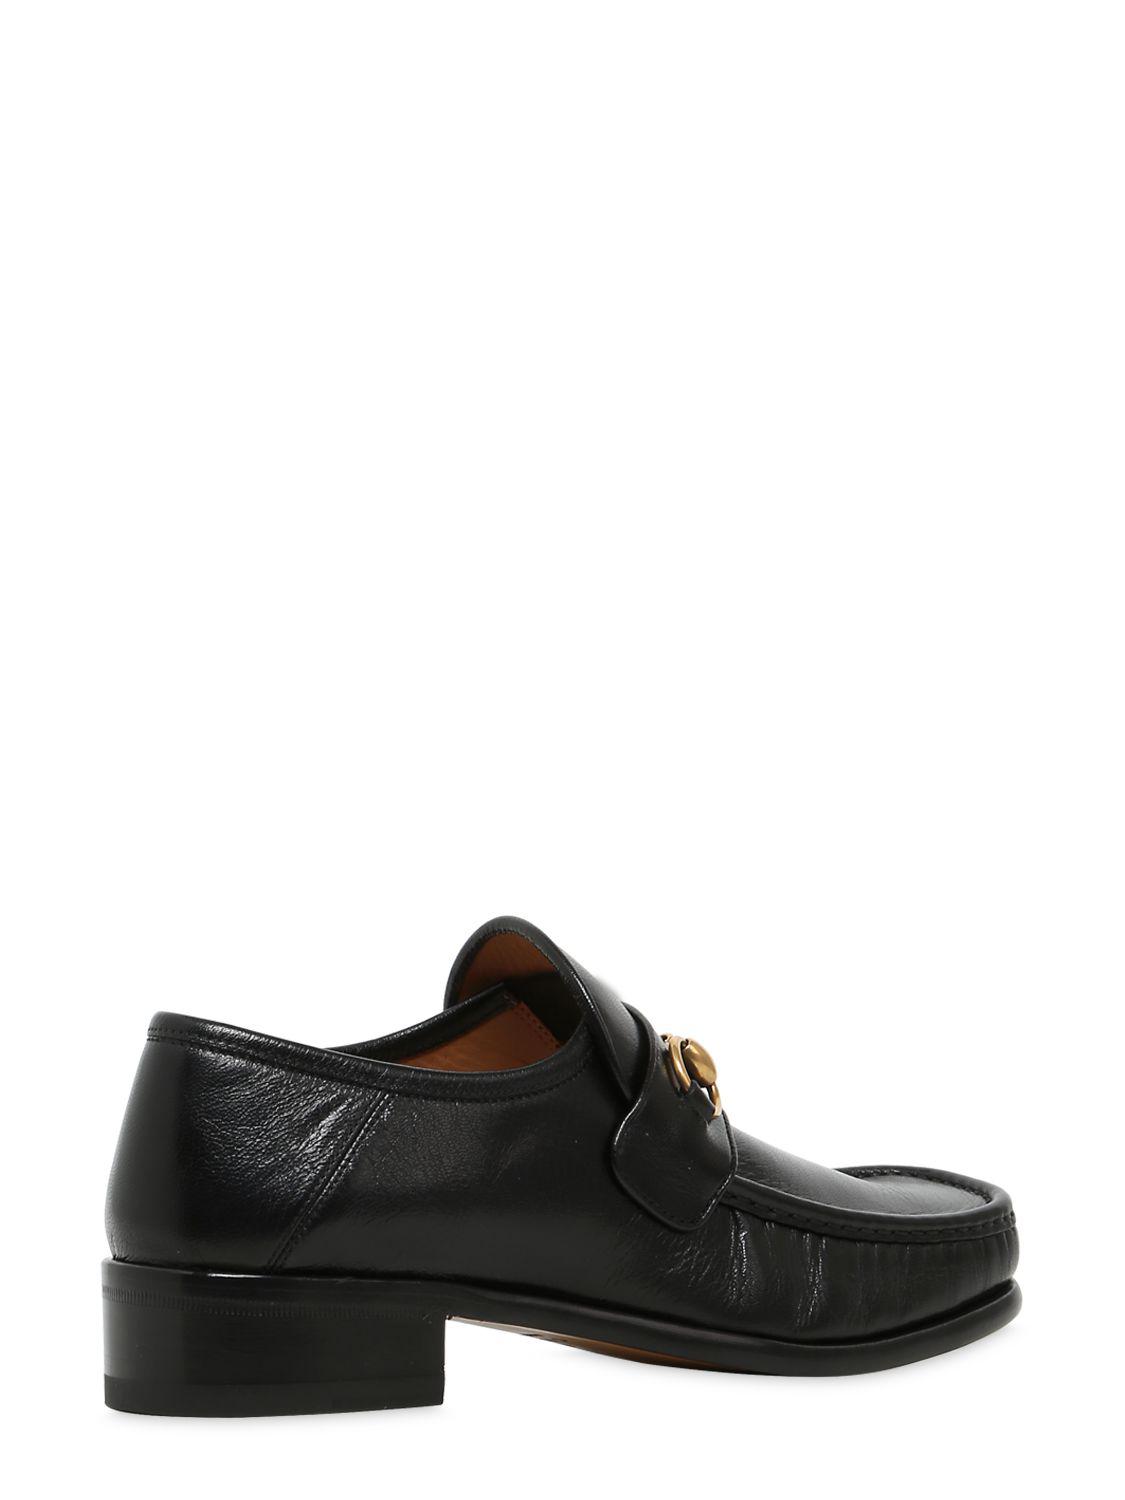 Gucci Horsebit Square-toe Leather Loafers in Black for Men | Lyst